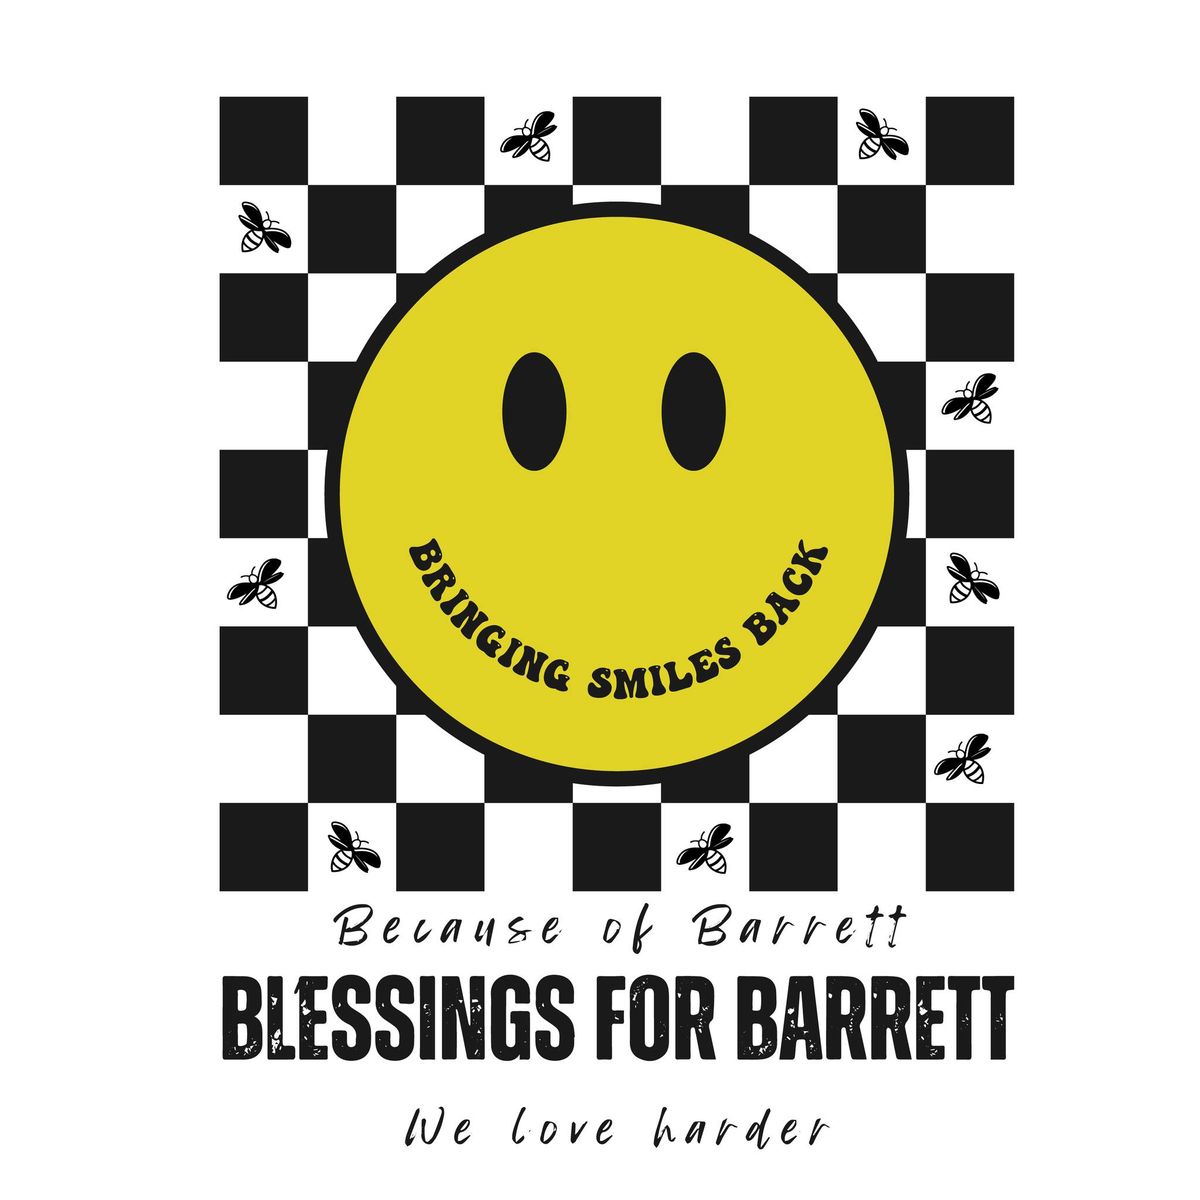 Blessings for Barrett: Friends and Family FUNdraiser feat: 3rd Annual Barrett's Bags Tournament